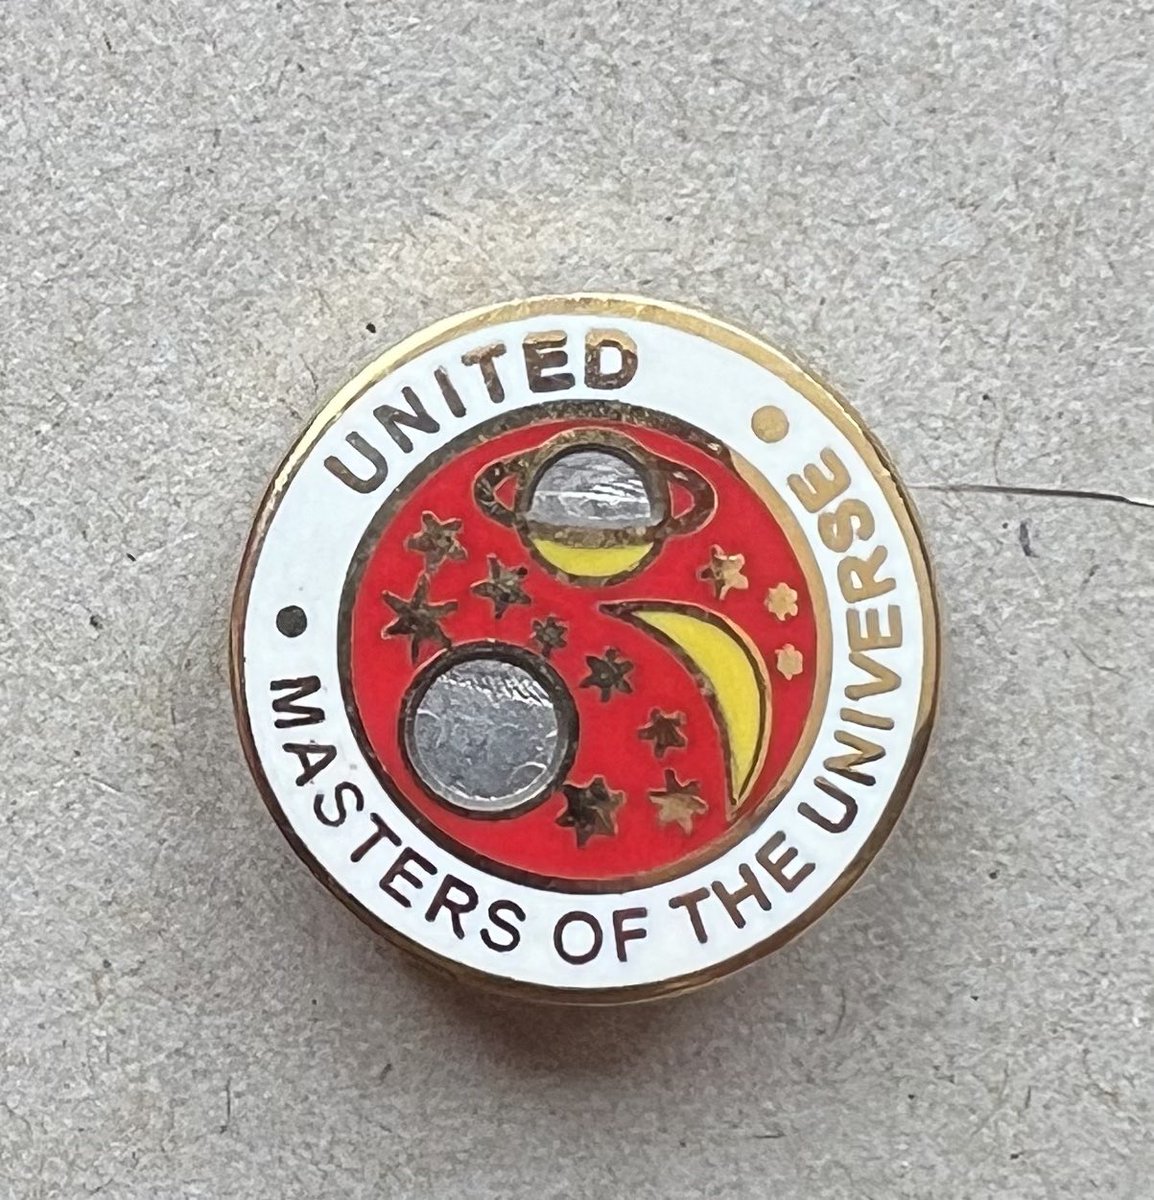 Today’s badge of the day. Despite current form it will always be the case! 😁 #MUFC #UTFR #GGMU #ManchesterUnited